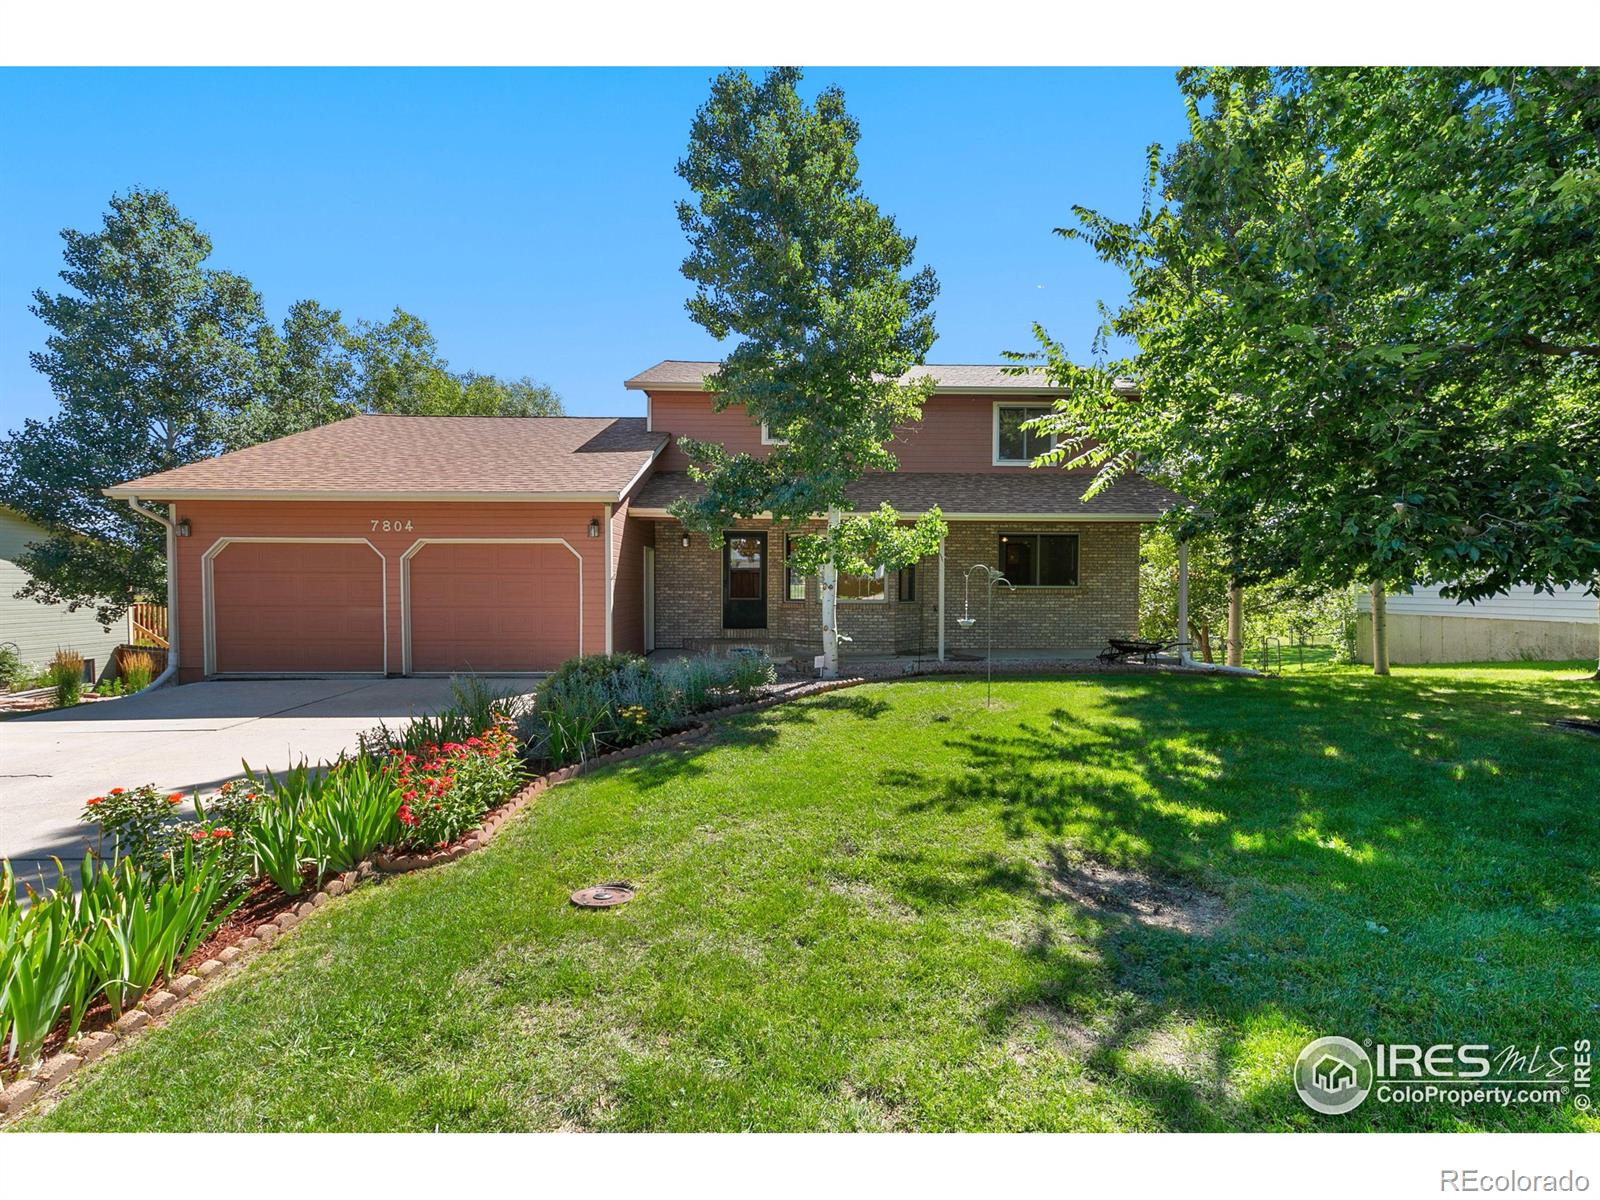 7804  emerald avenue, Fort Collins sold home. Closed on 2023-09-15 for $510,000.